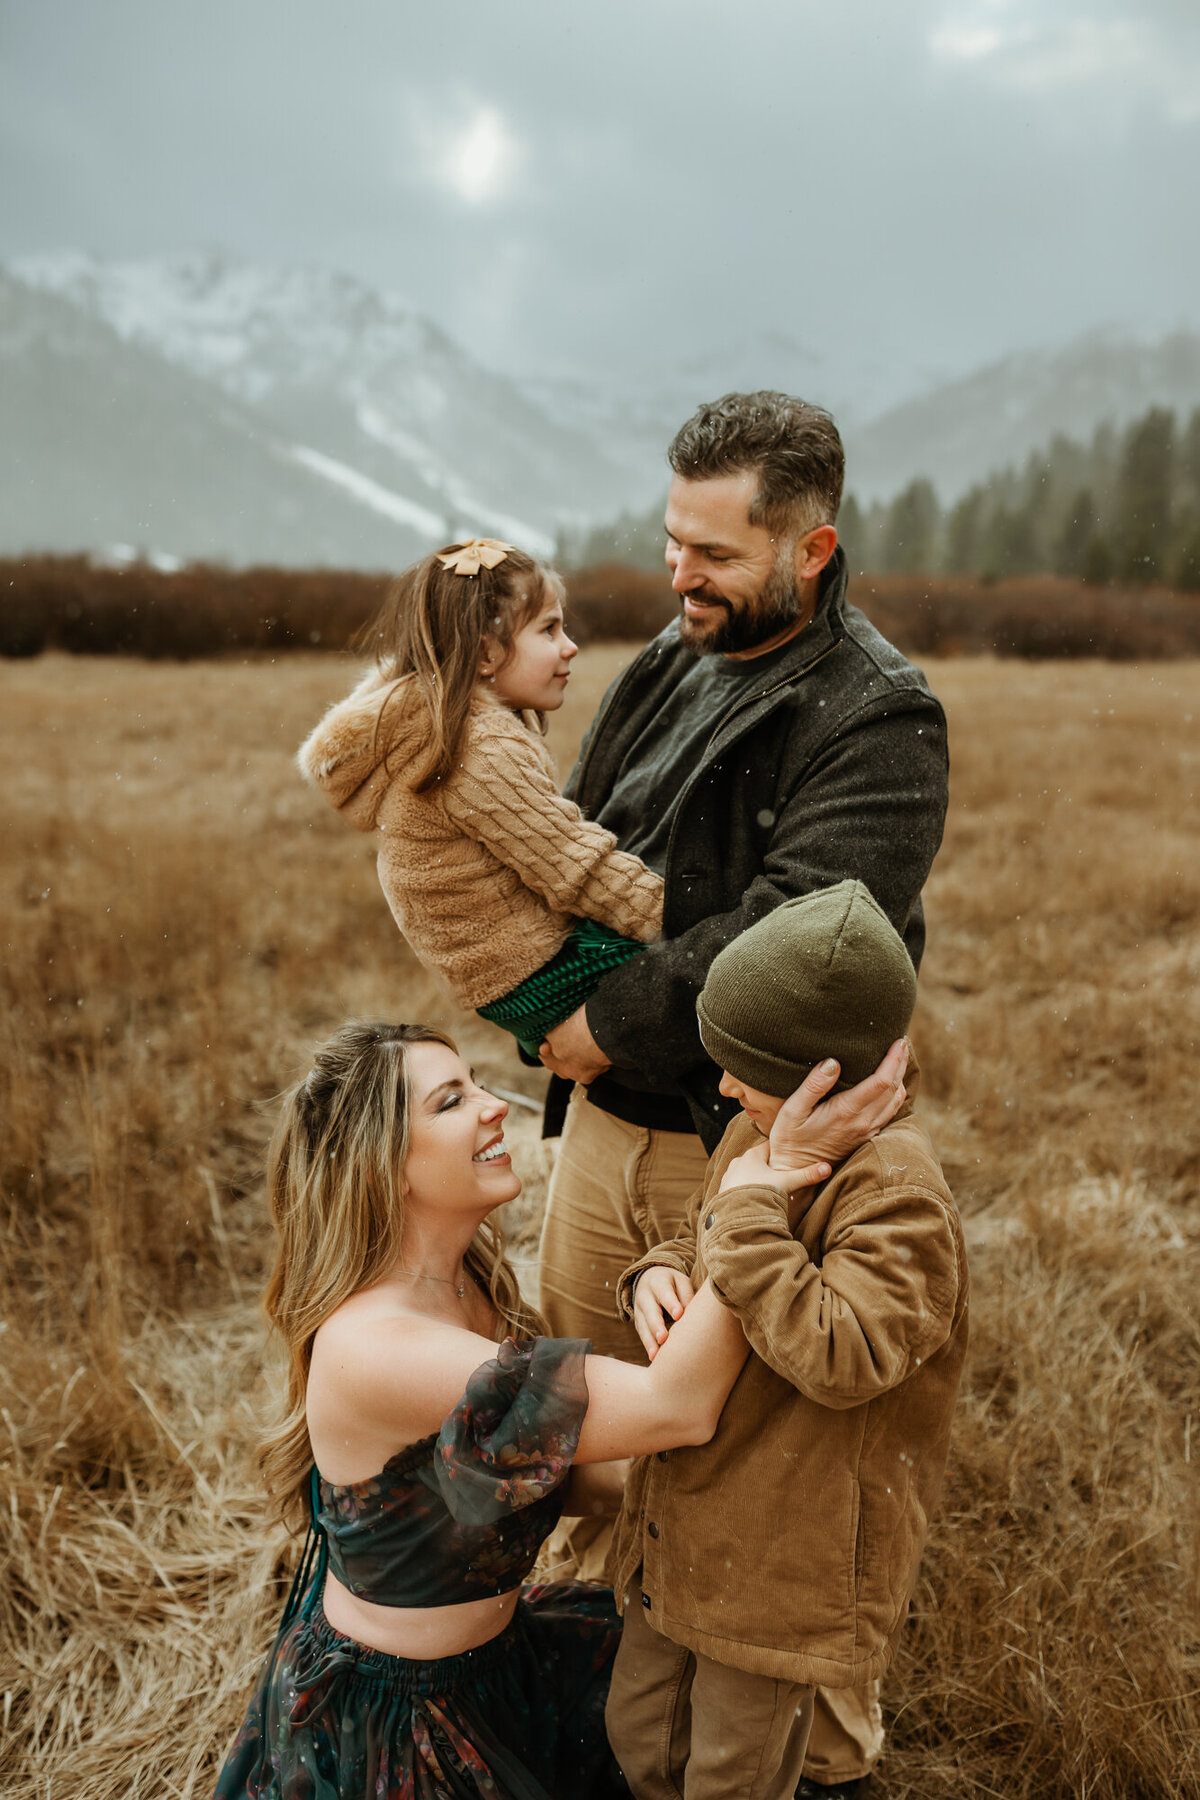 Mom is kneeling and holding her son's cheek, and the dad is behind mom standing while holding their daughter in a field with snowy mountains